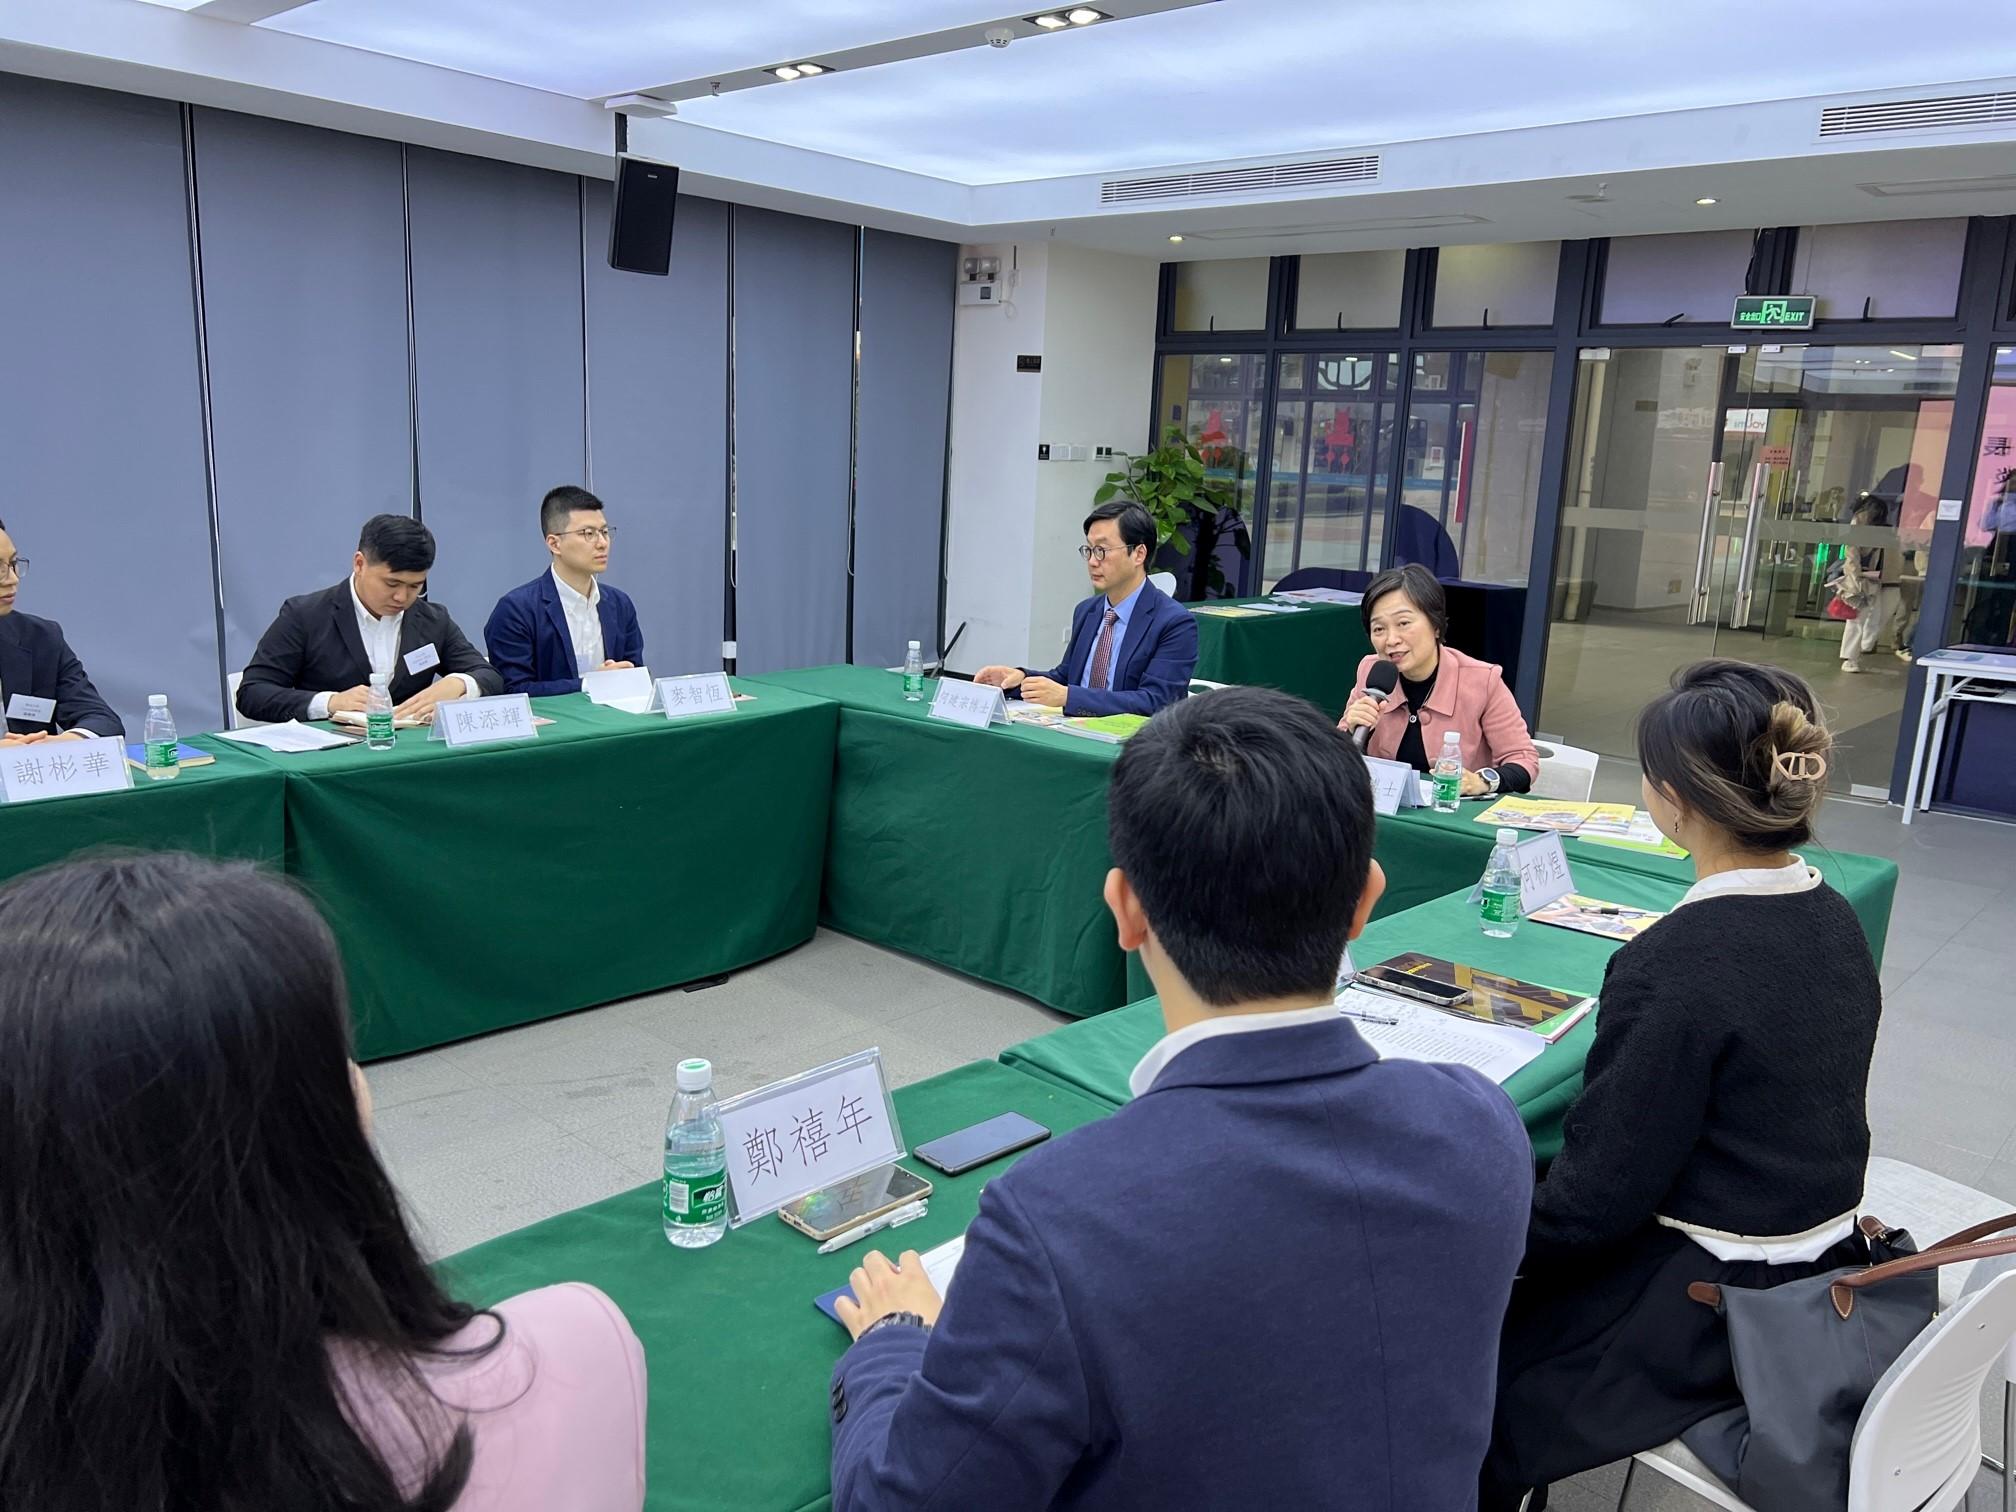 The Secretary for Education, Dr Choi Yuk-lin, today (March 8) visited the Support and Development Centre for Hong Kong and Macao Youths in Mainland China. Photo shows Dr Choi (first right) chatting with Hong Kong students and graduates of Mainland higher education institutions to learn about their studies and career development on the Mainland.